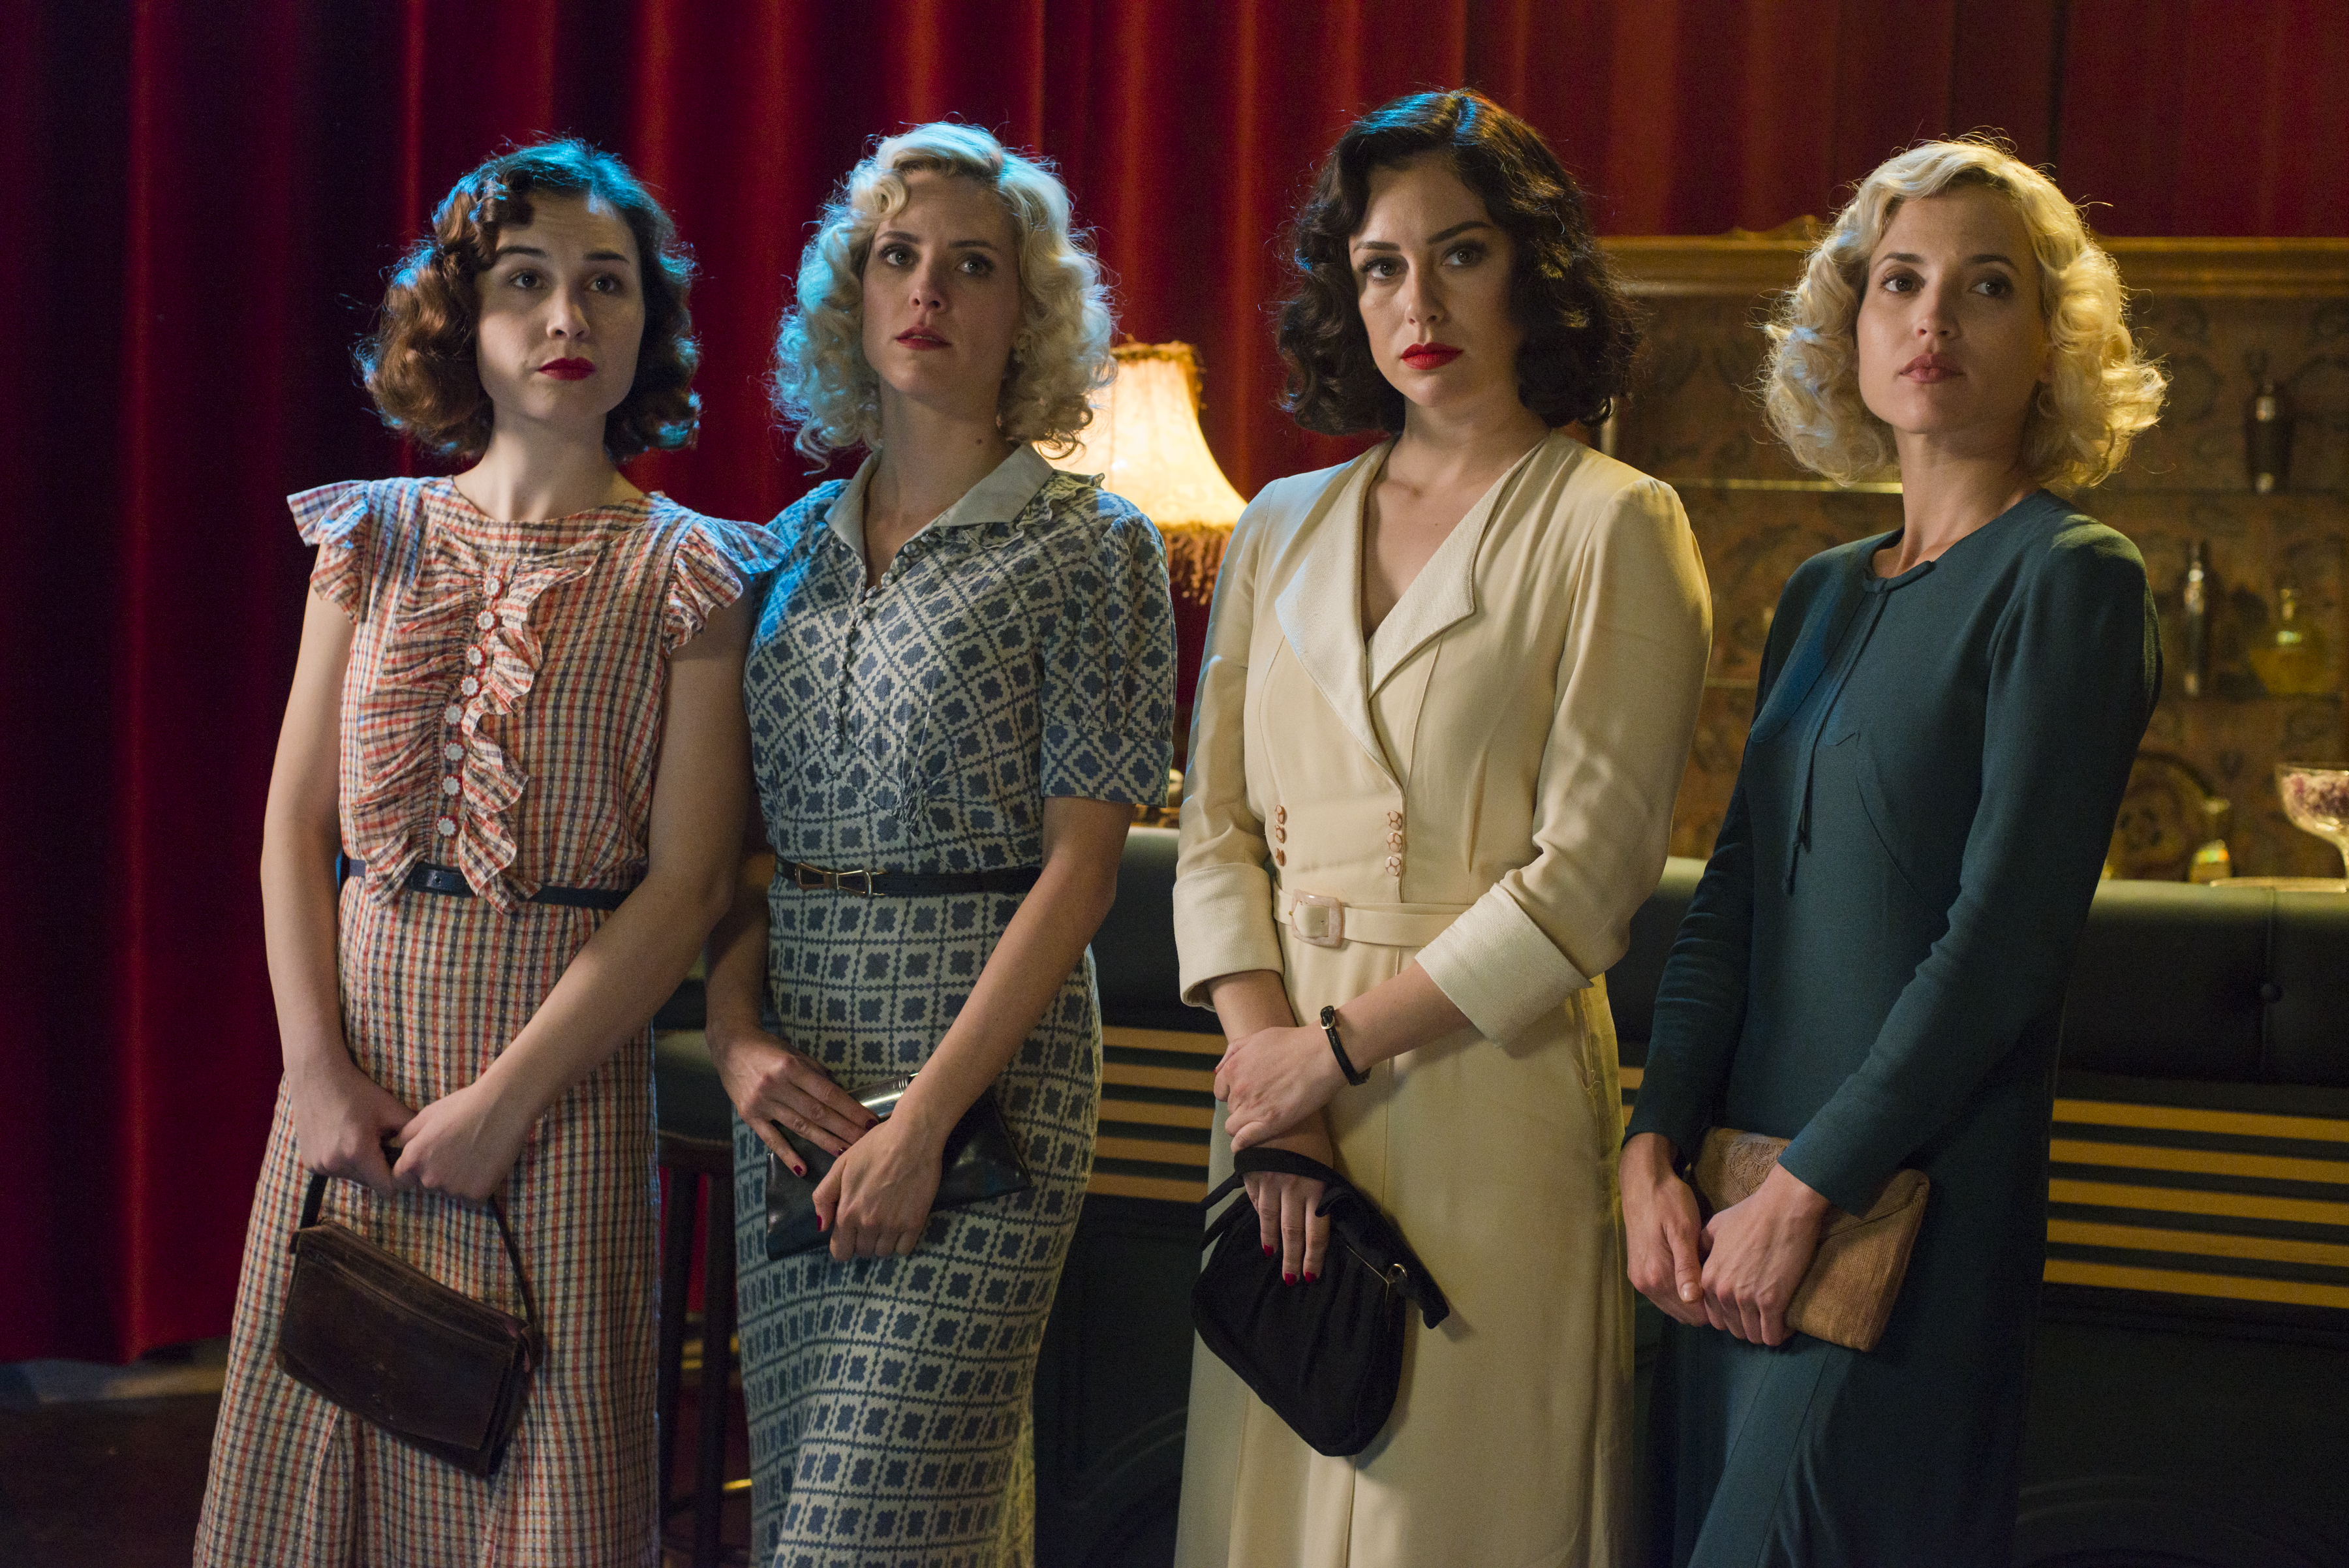 <p>Welcome to Madrid in the late 1920s, the setting for Netflix's soapy, stylish and oh-so-binge-worthy Spanish period drama "Cable Girls," which debuted on the streamer in 2017. The five-season series follows four young women working as switchboard operators at Spain's first phone company at a time when women were pushing for more equality. As friendships between the women deepen, so does the drama around them, leaving the "cable girls" -- played by Blanca Suárez, Ana Fernández, Nadia de Santiago and Maggie Civantos -- to navigate a litany of loves, lies and abuses while leaning on each other for support. The fashion alone is worth a peek.</p>